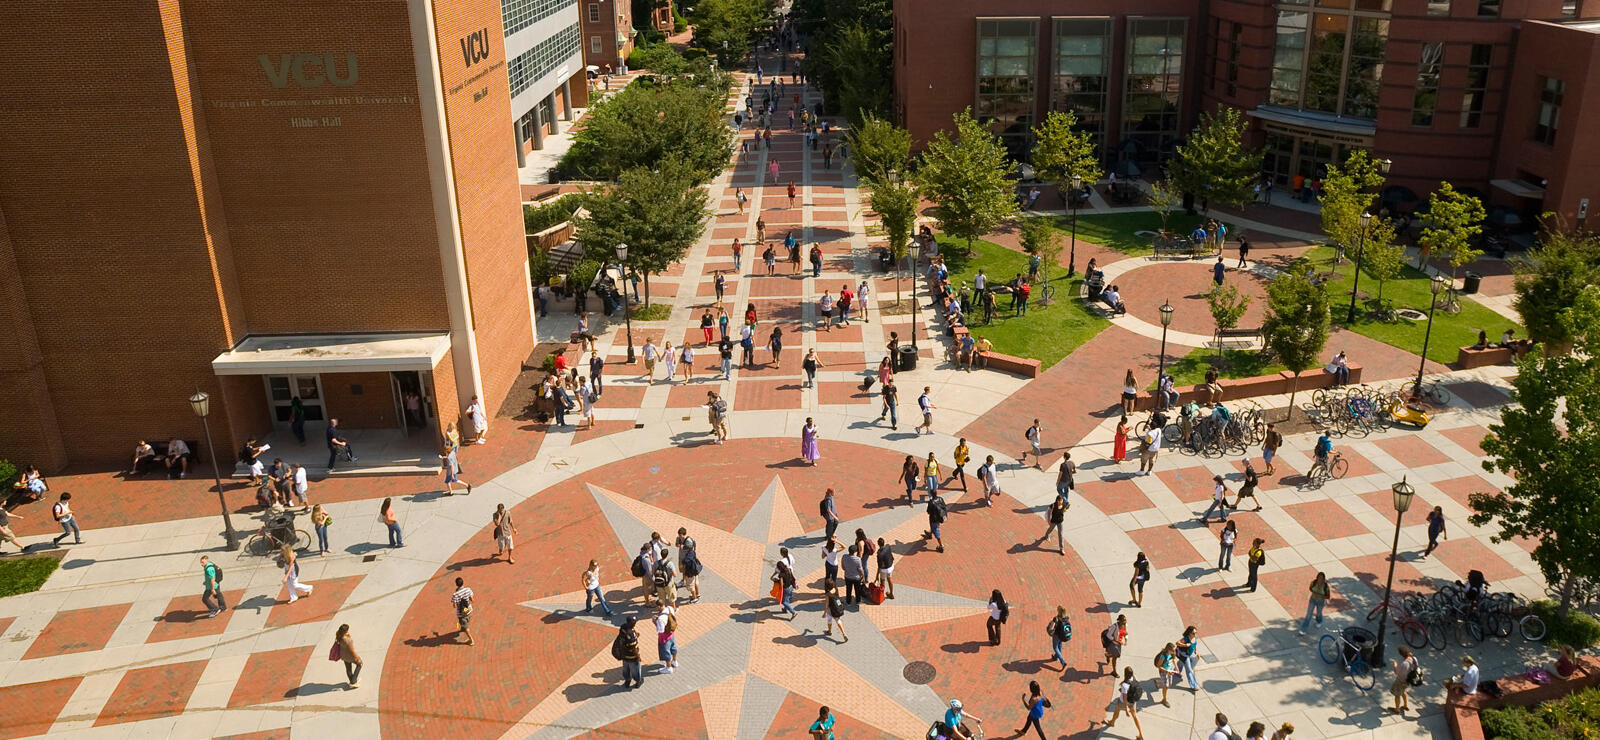 An aerial view of the Compass at Virginia Commonwealth University with students walking